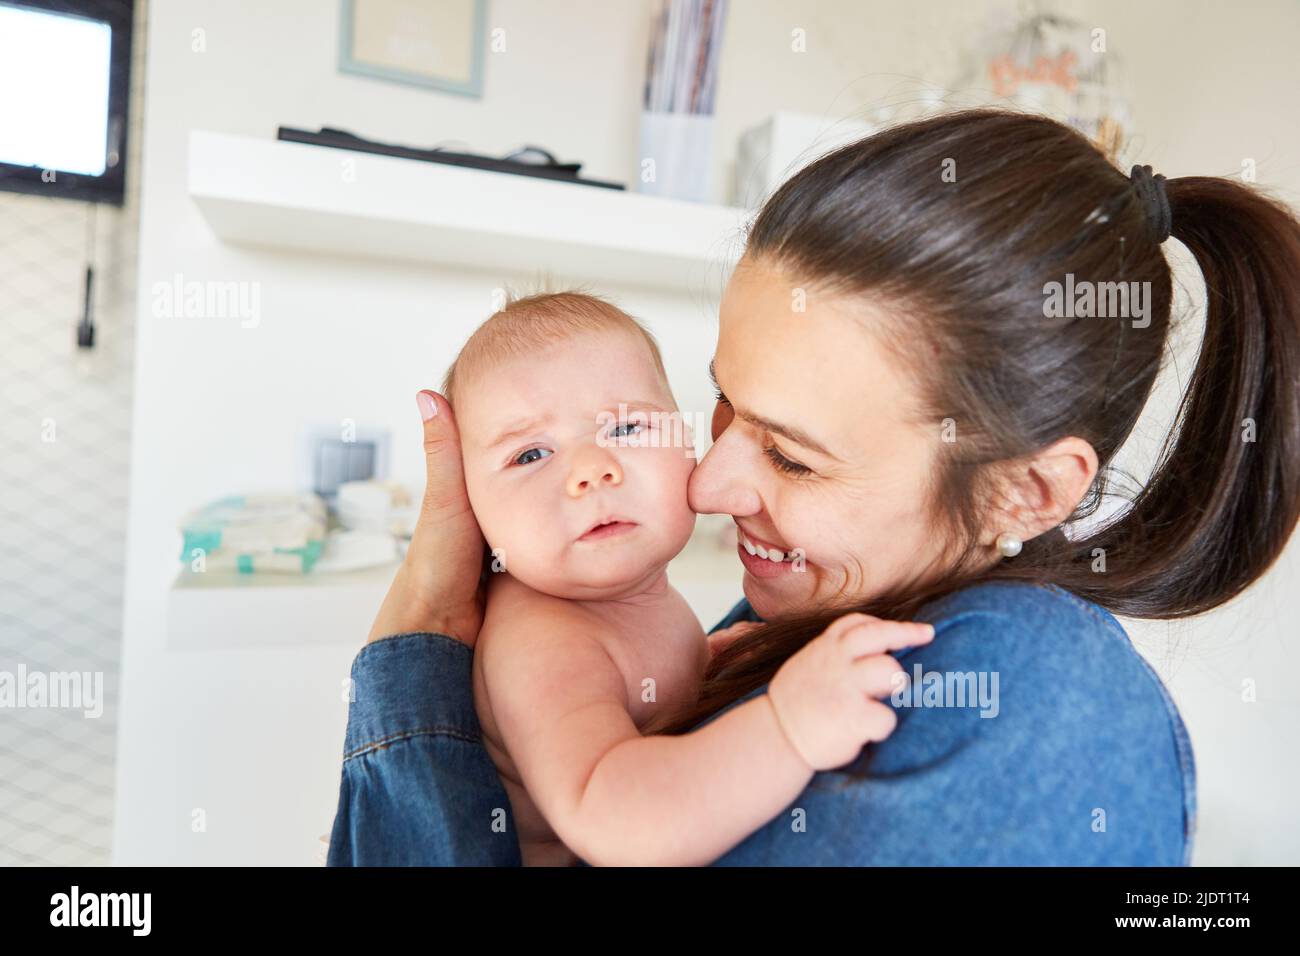 Happy woman as a mother holds her newborn baby safely and lovingly in her arms Stock Photo